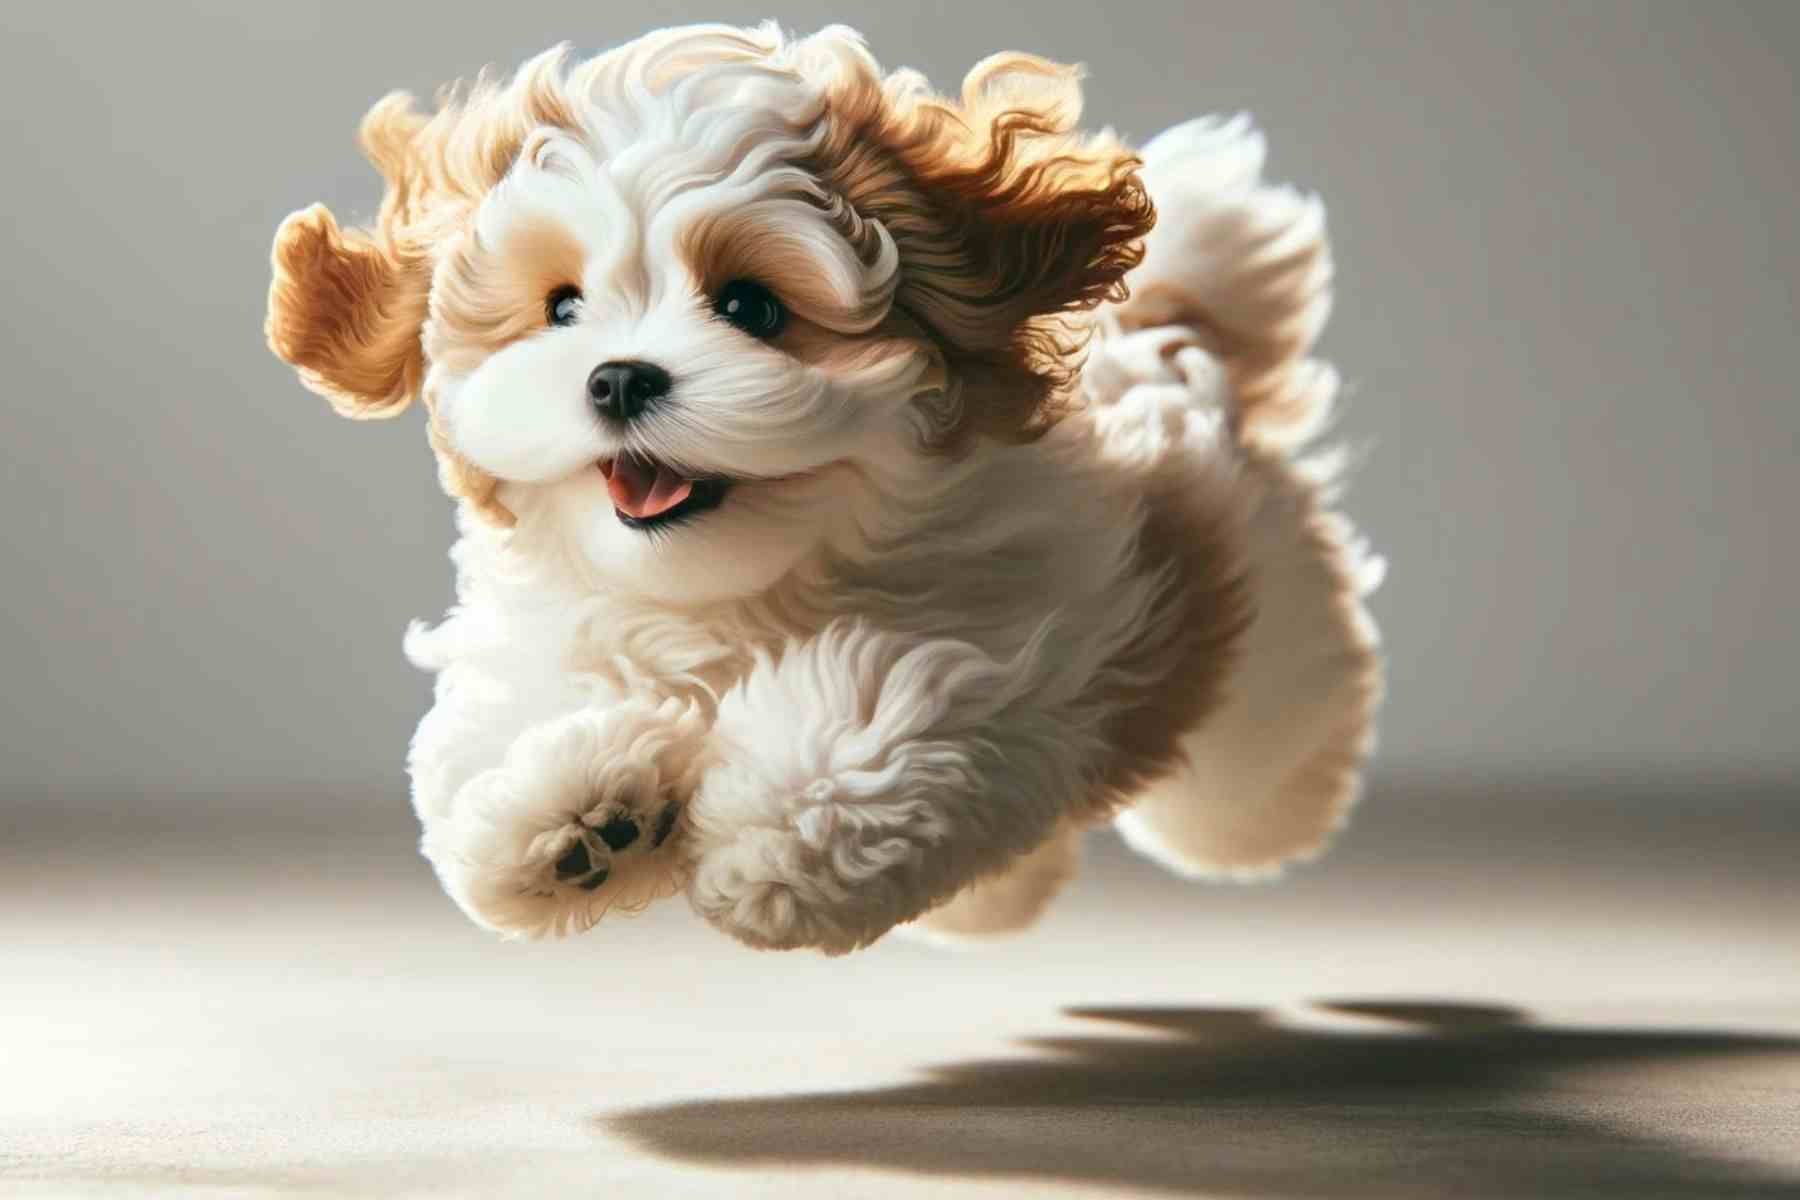 9 Key Facts to Know About the Cavachon Breed